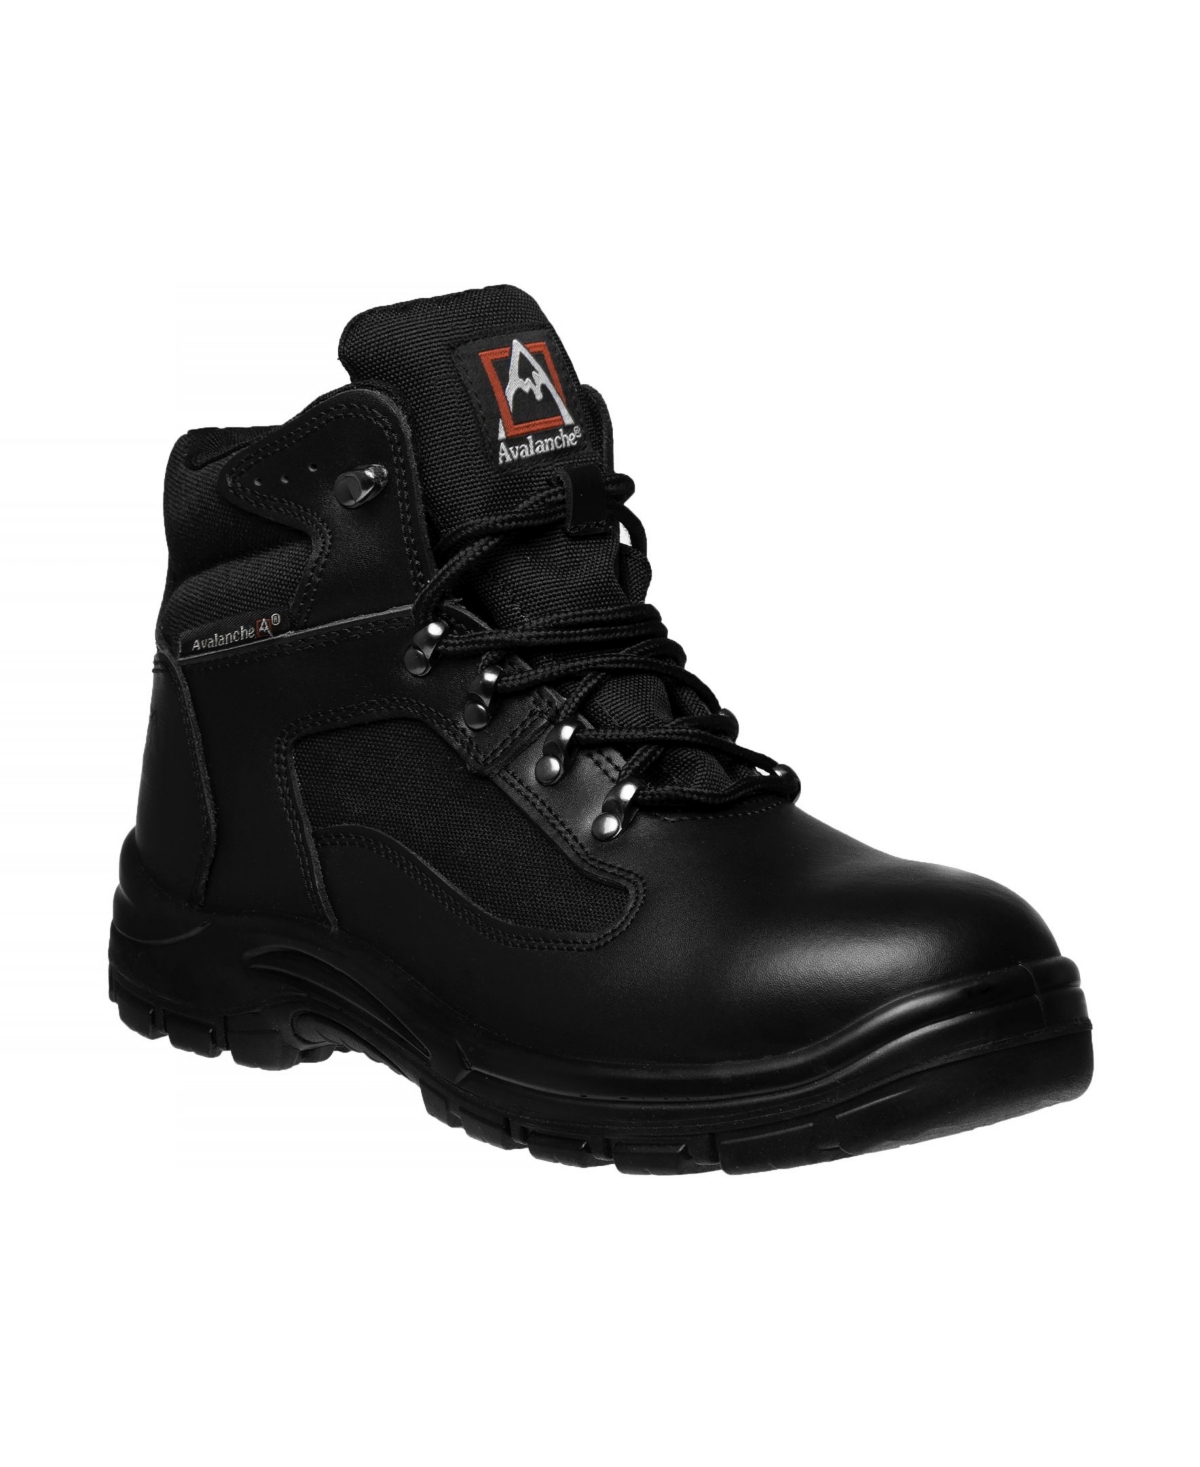 Josmo Avalanche Men's Steel Toe and Construction Work Boots Men's Shoes